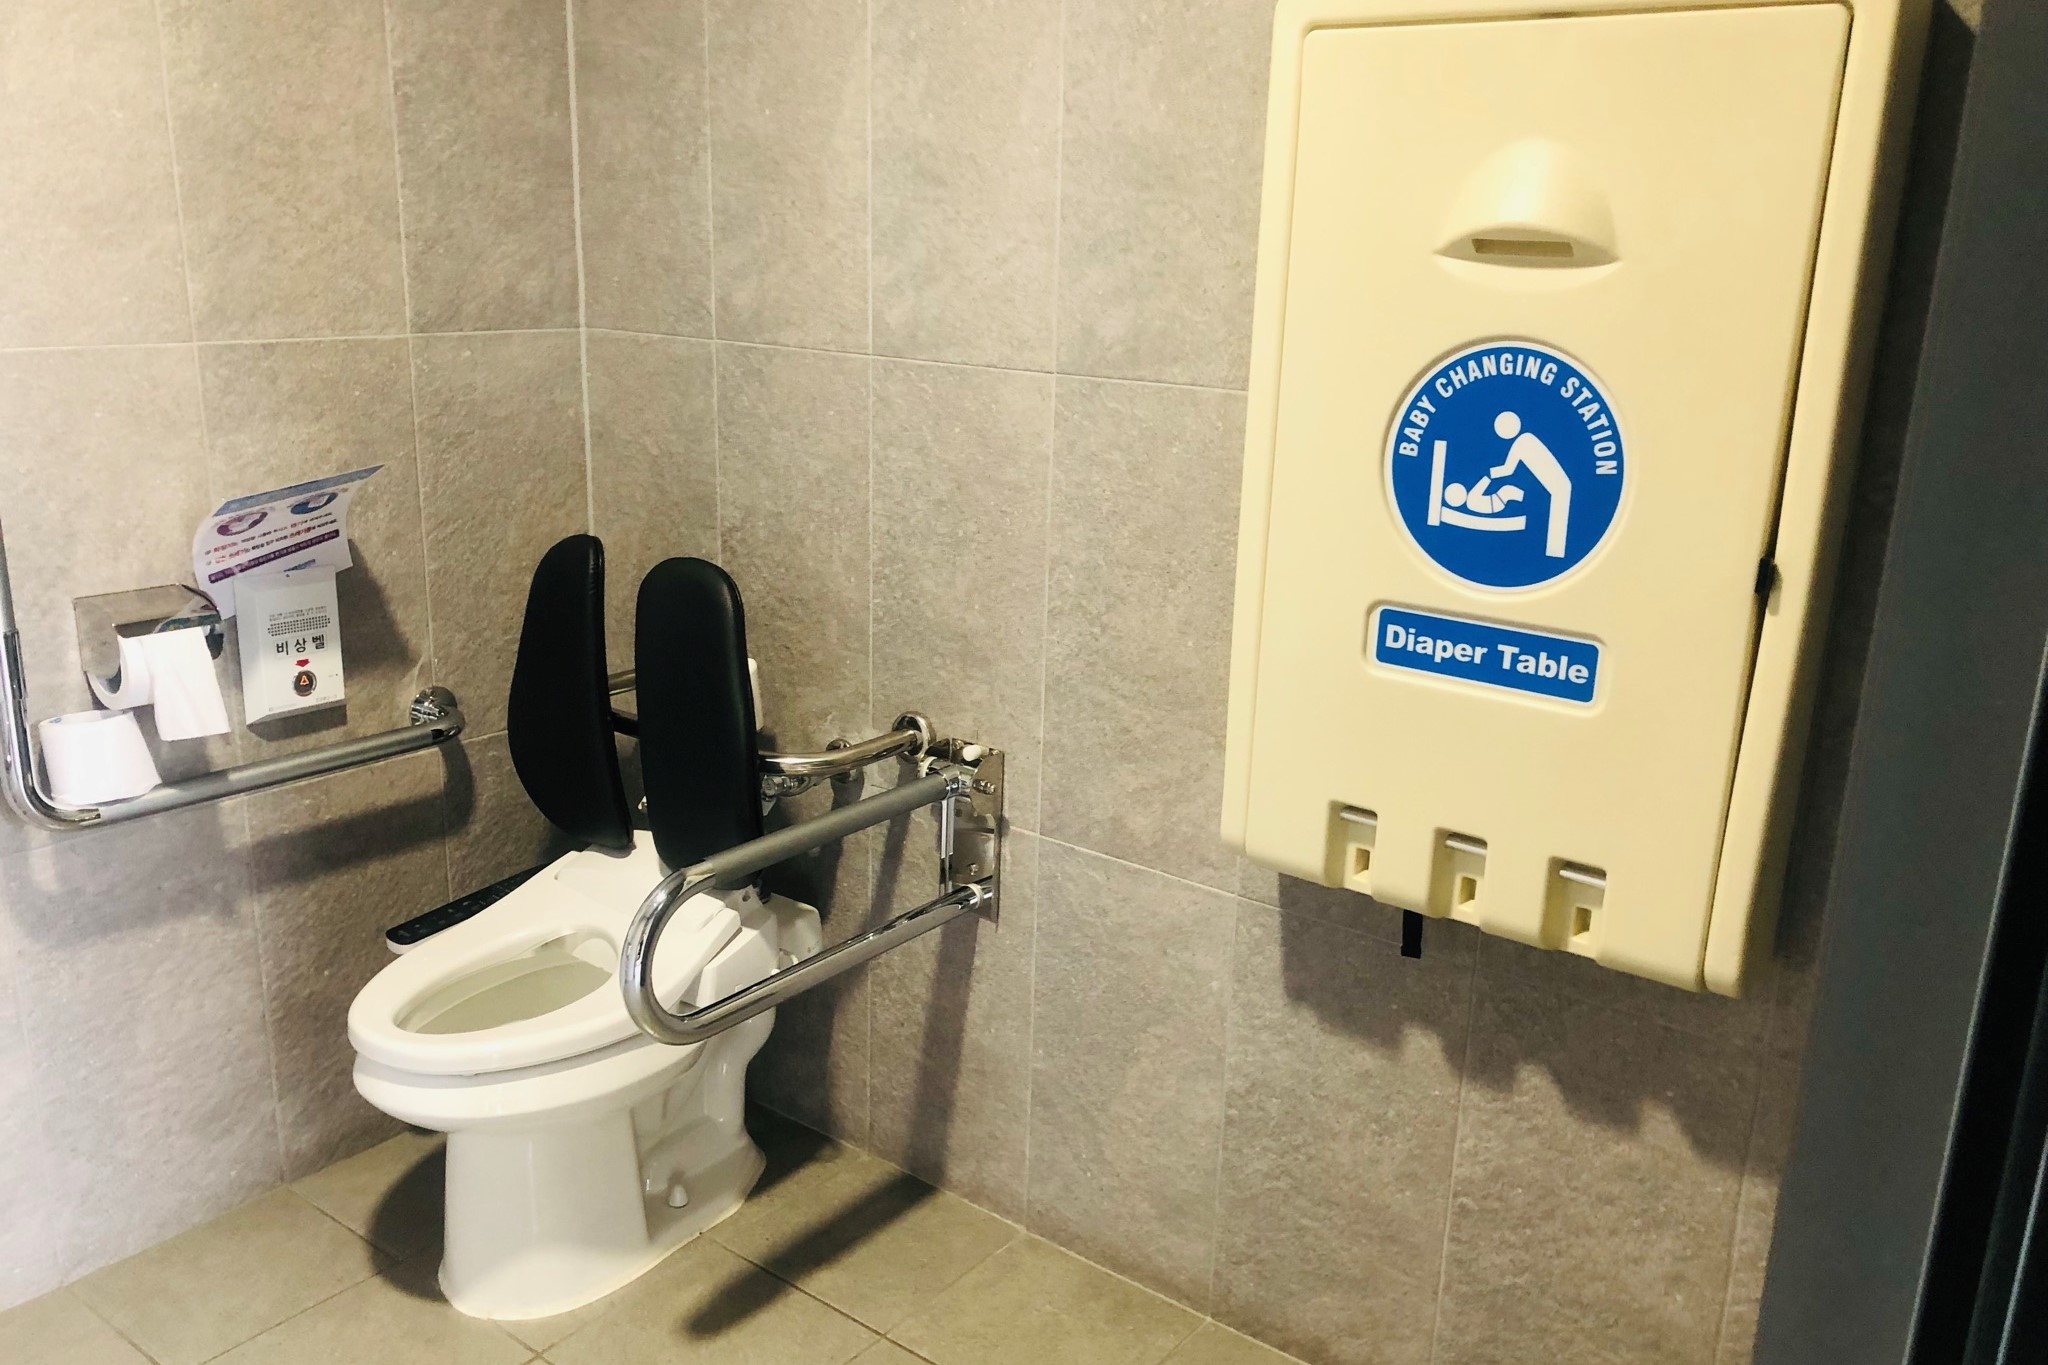 Facilities for expecting mothers and children0 : Diaper changing stations installed inside the accessible restrooms